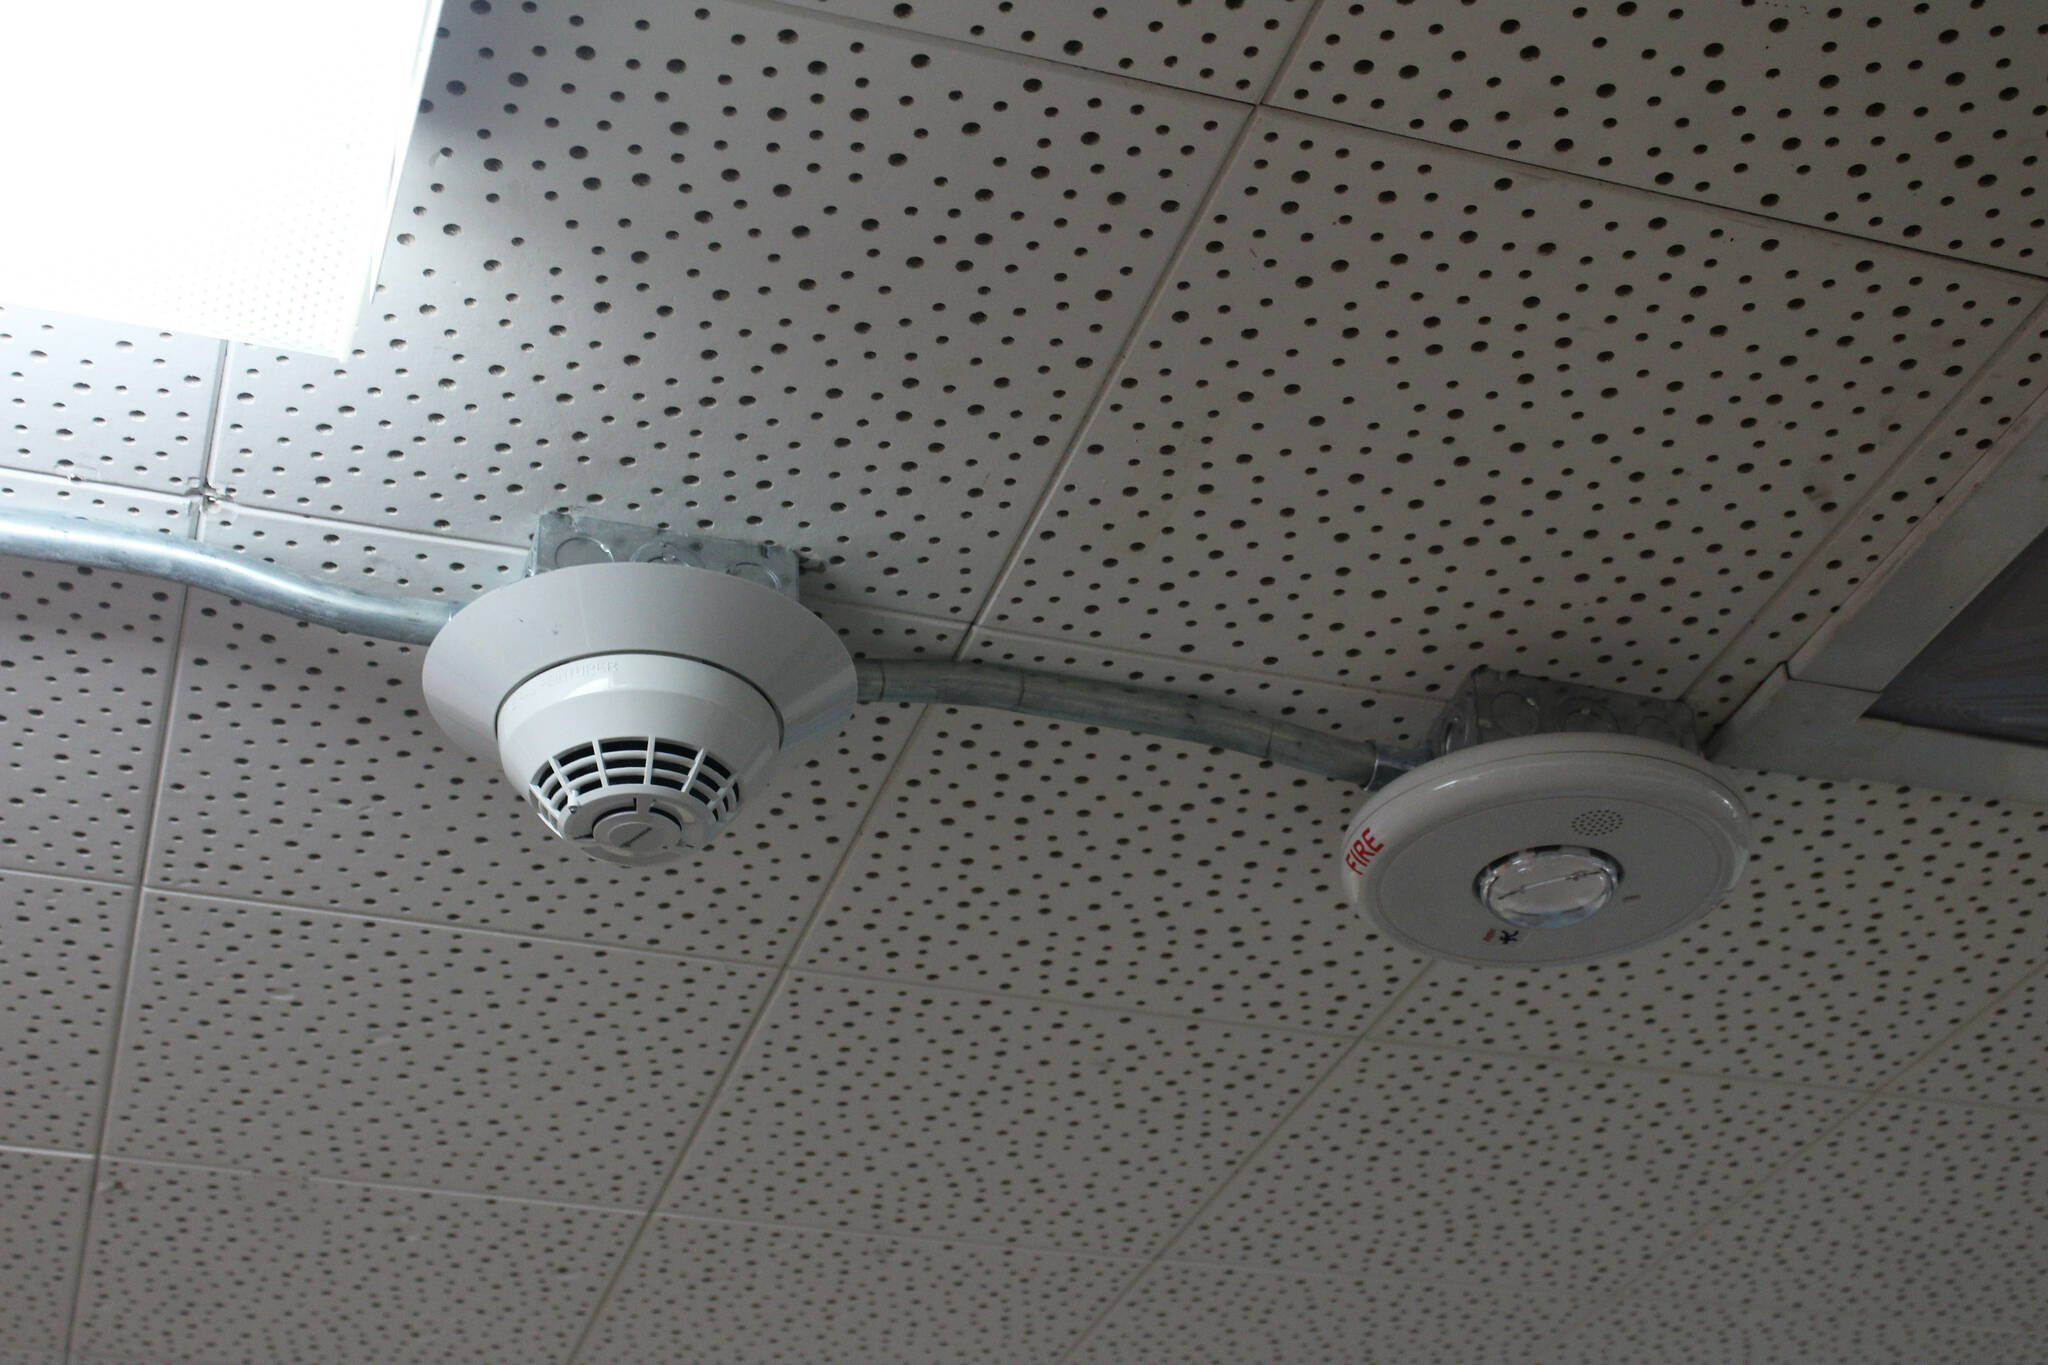 Fire alarms are mounted to the ceiling inside of Soldotna Elementary School on Friday, Sept. 30, 2022, in Soldotna, Alaska. (Ashlyn O’Hara/Peninsula Clarion)